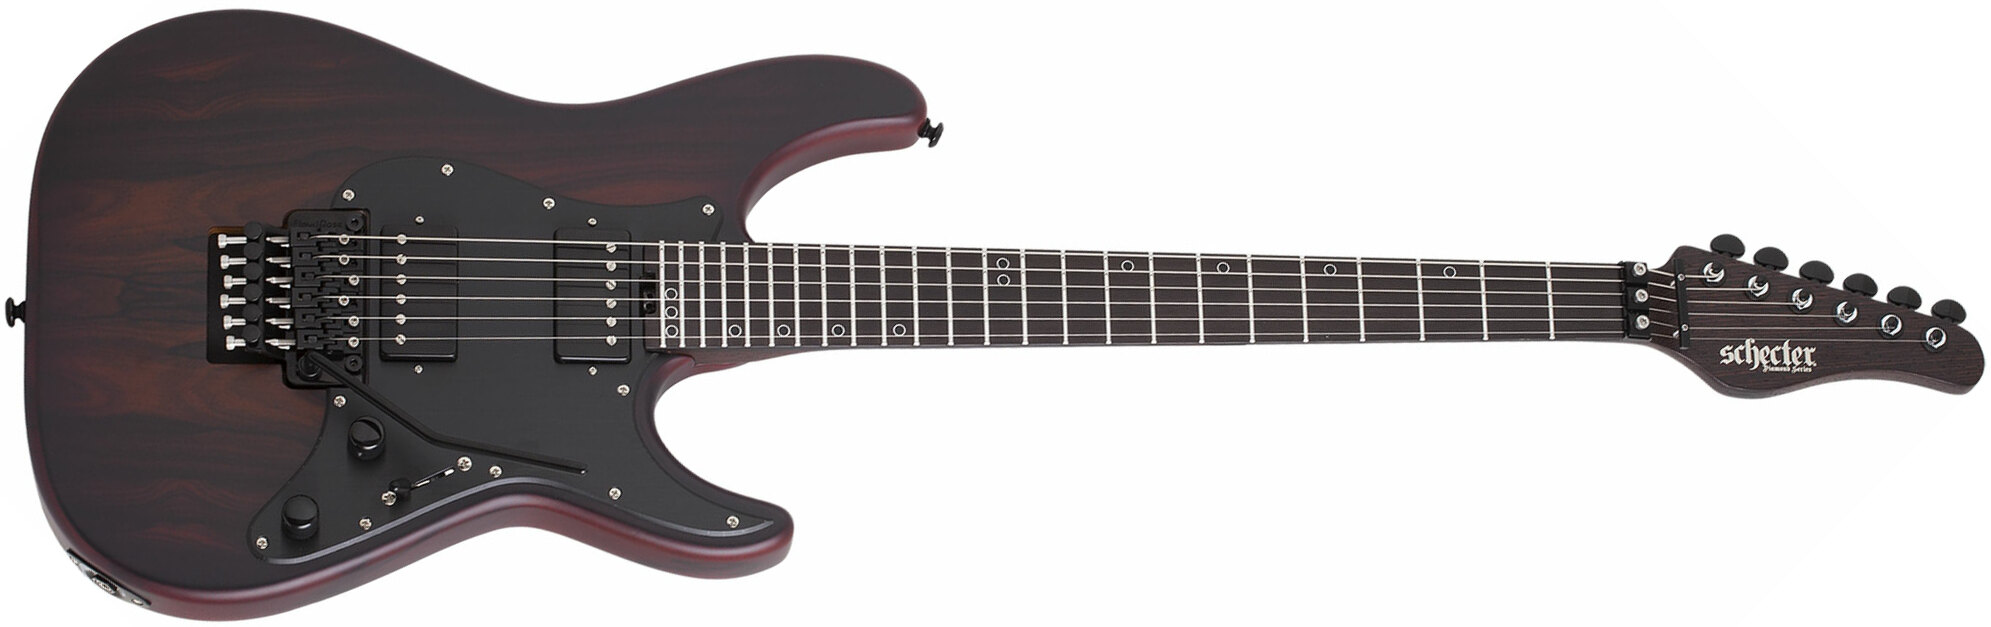 Schecter Sun Valley Super Shredder Exotic Ziricote 2h Fr Eb - Natural - Metal electric guitar - Main picture